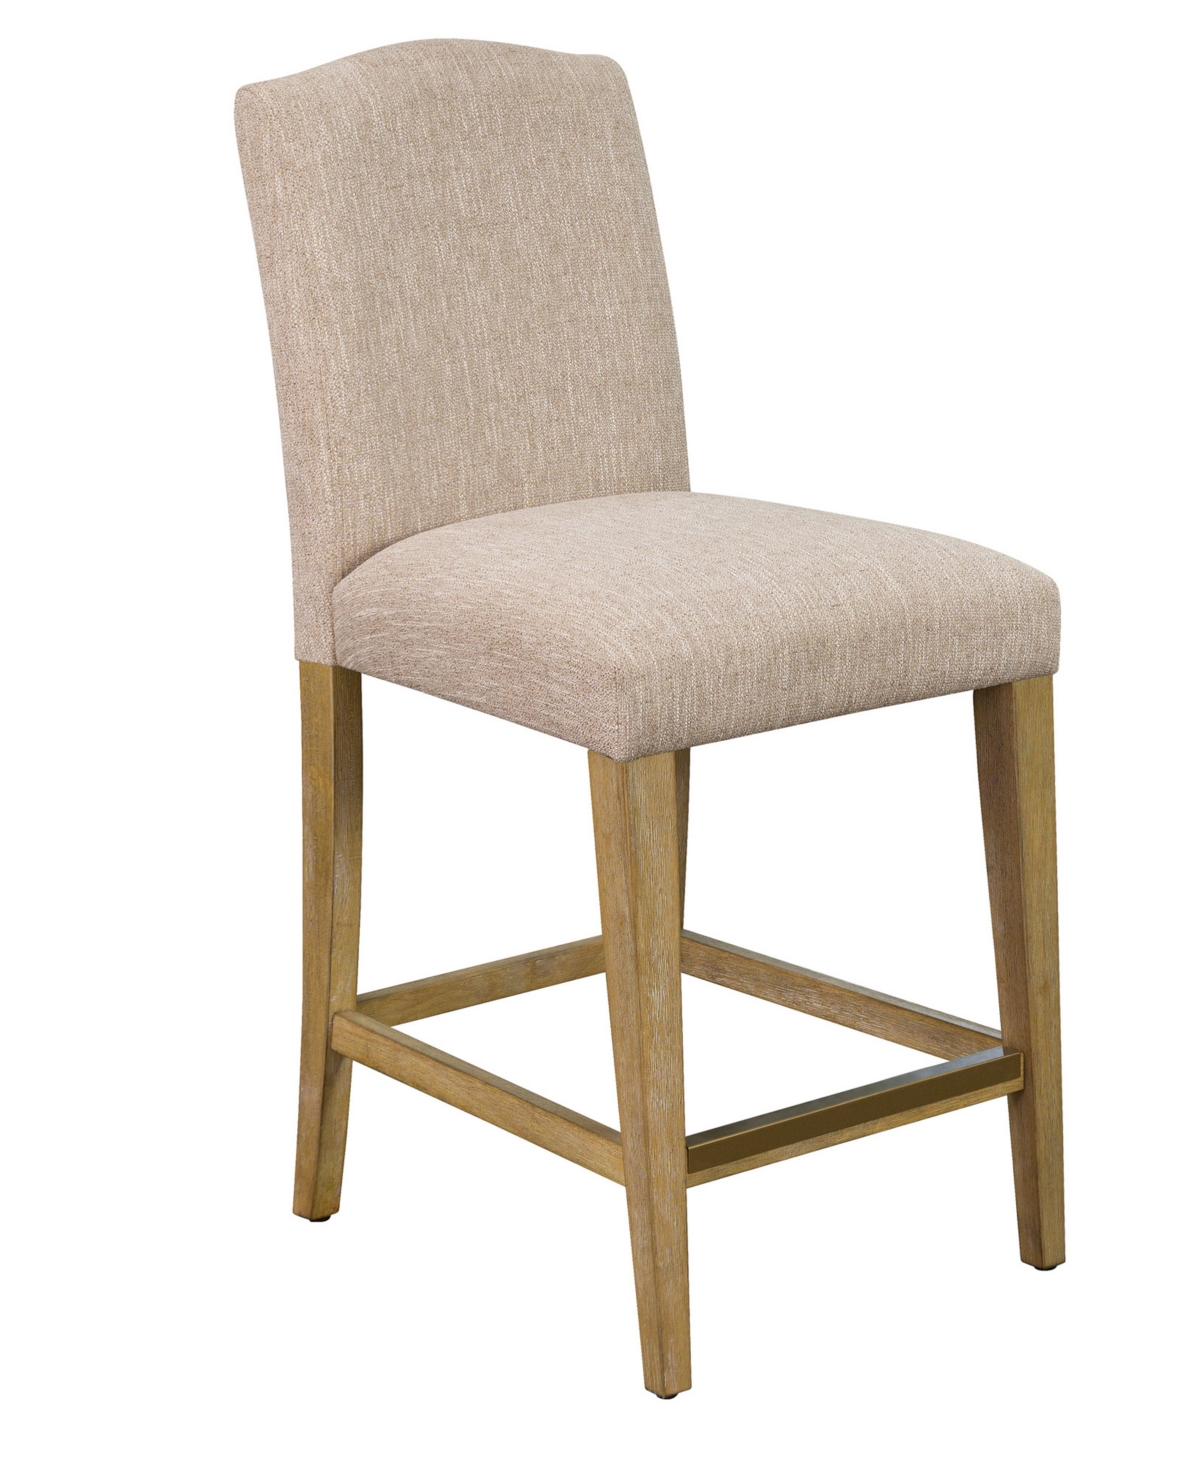 Martha Stewart Collection Martha Stewart Connor 25" High Fabric Upholstered Counter Stool In Tan